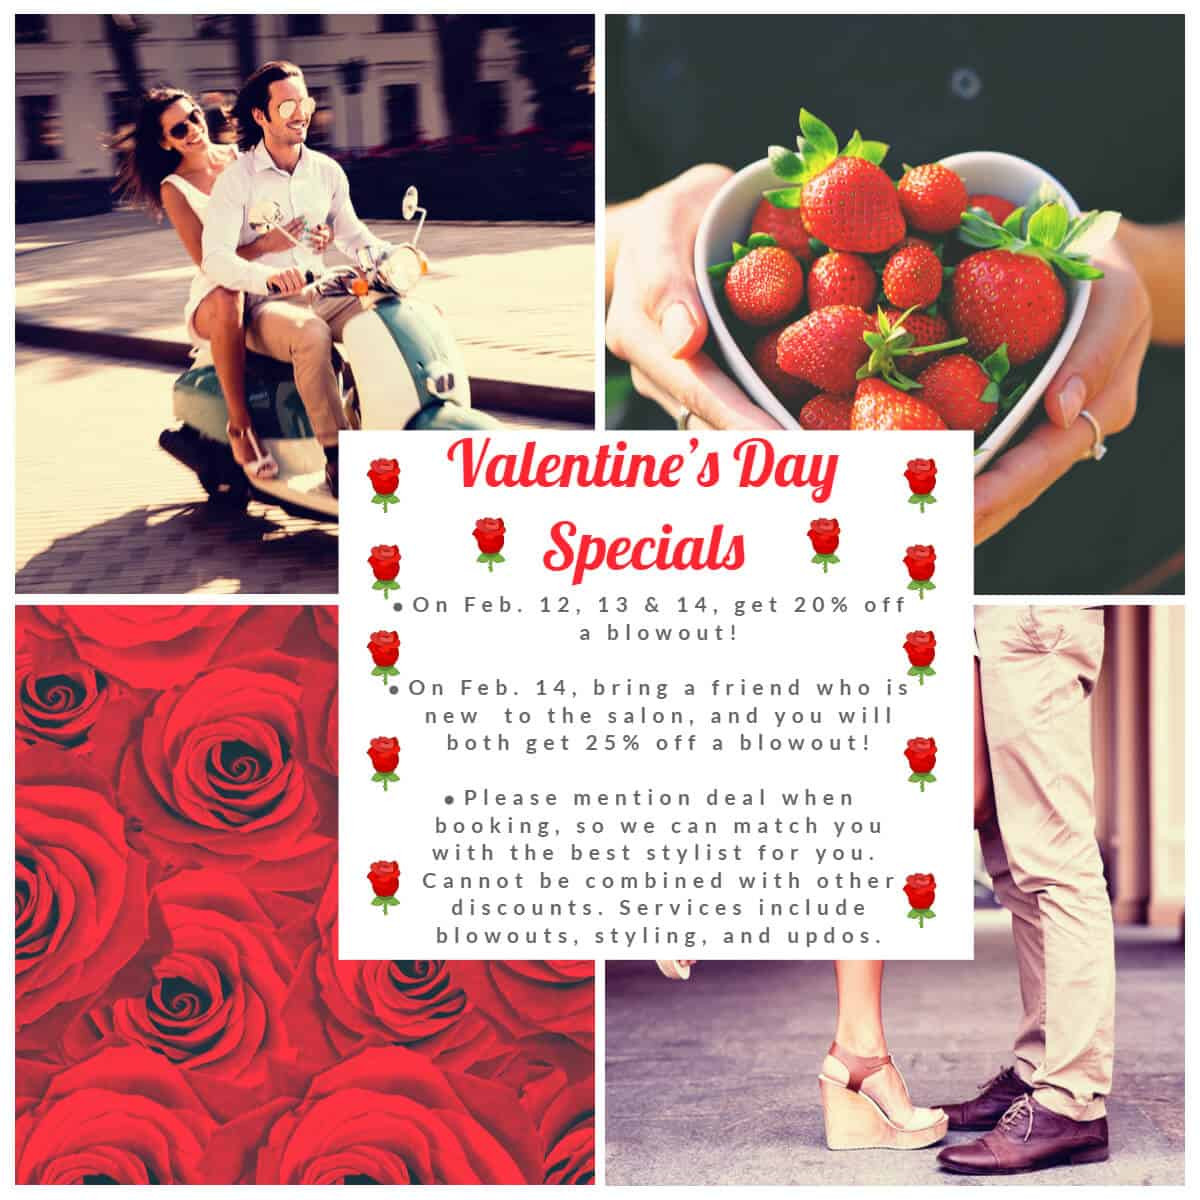 Valentines Day Date Ideas 2019
 Valentines Day 2019 Specials and Gift Ideas Amaci Salon